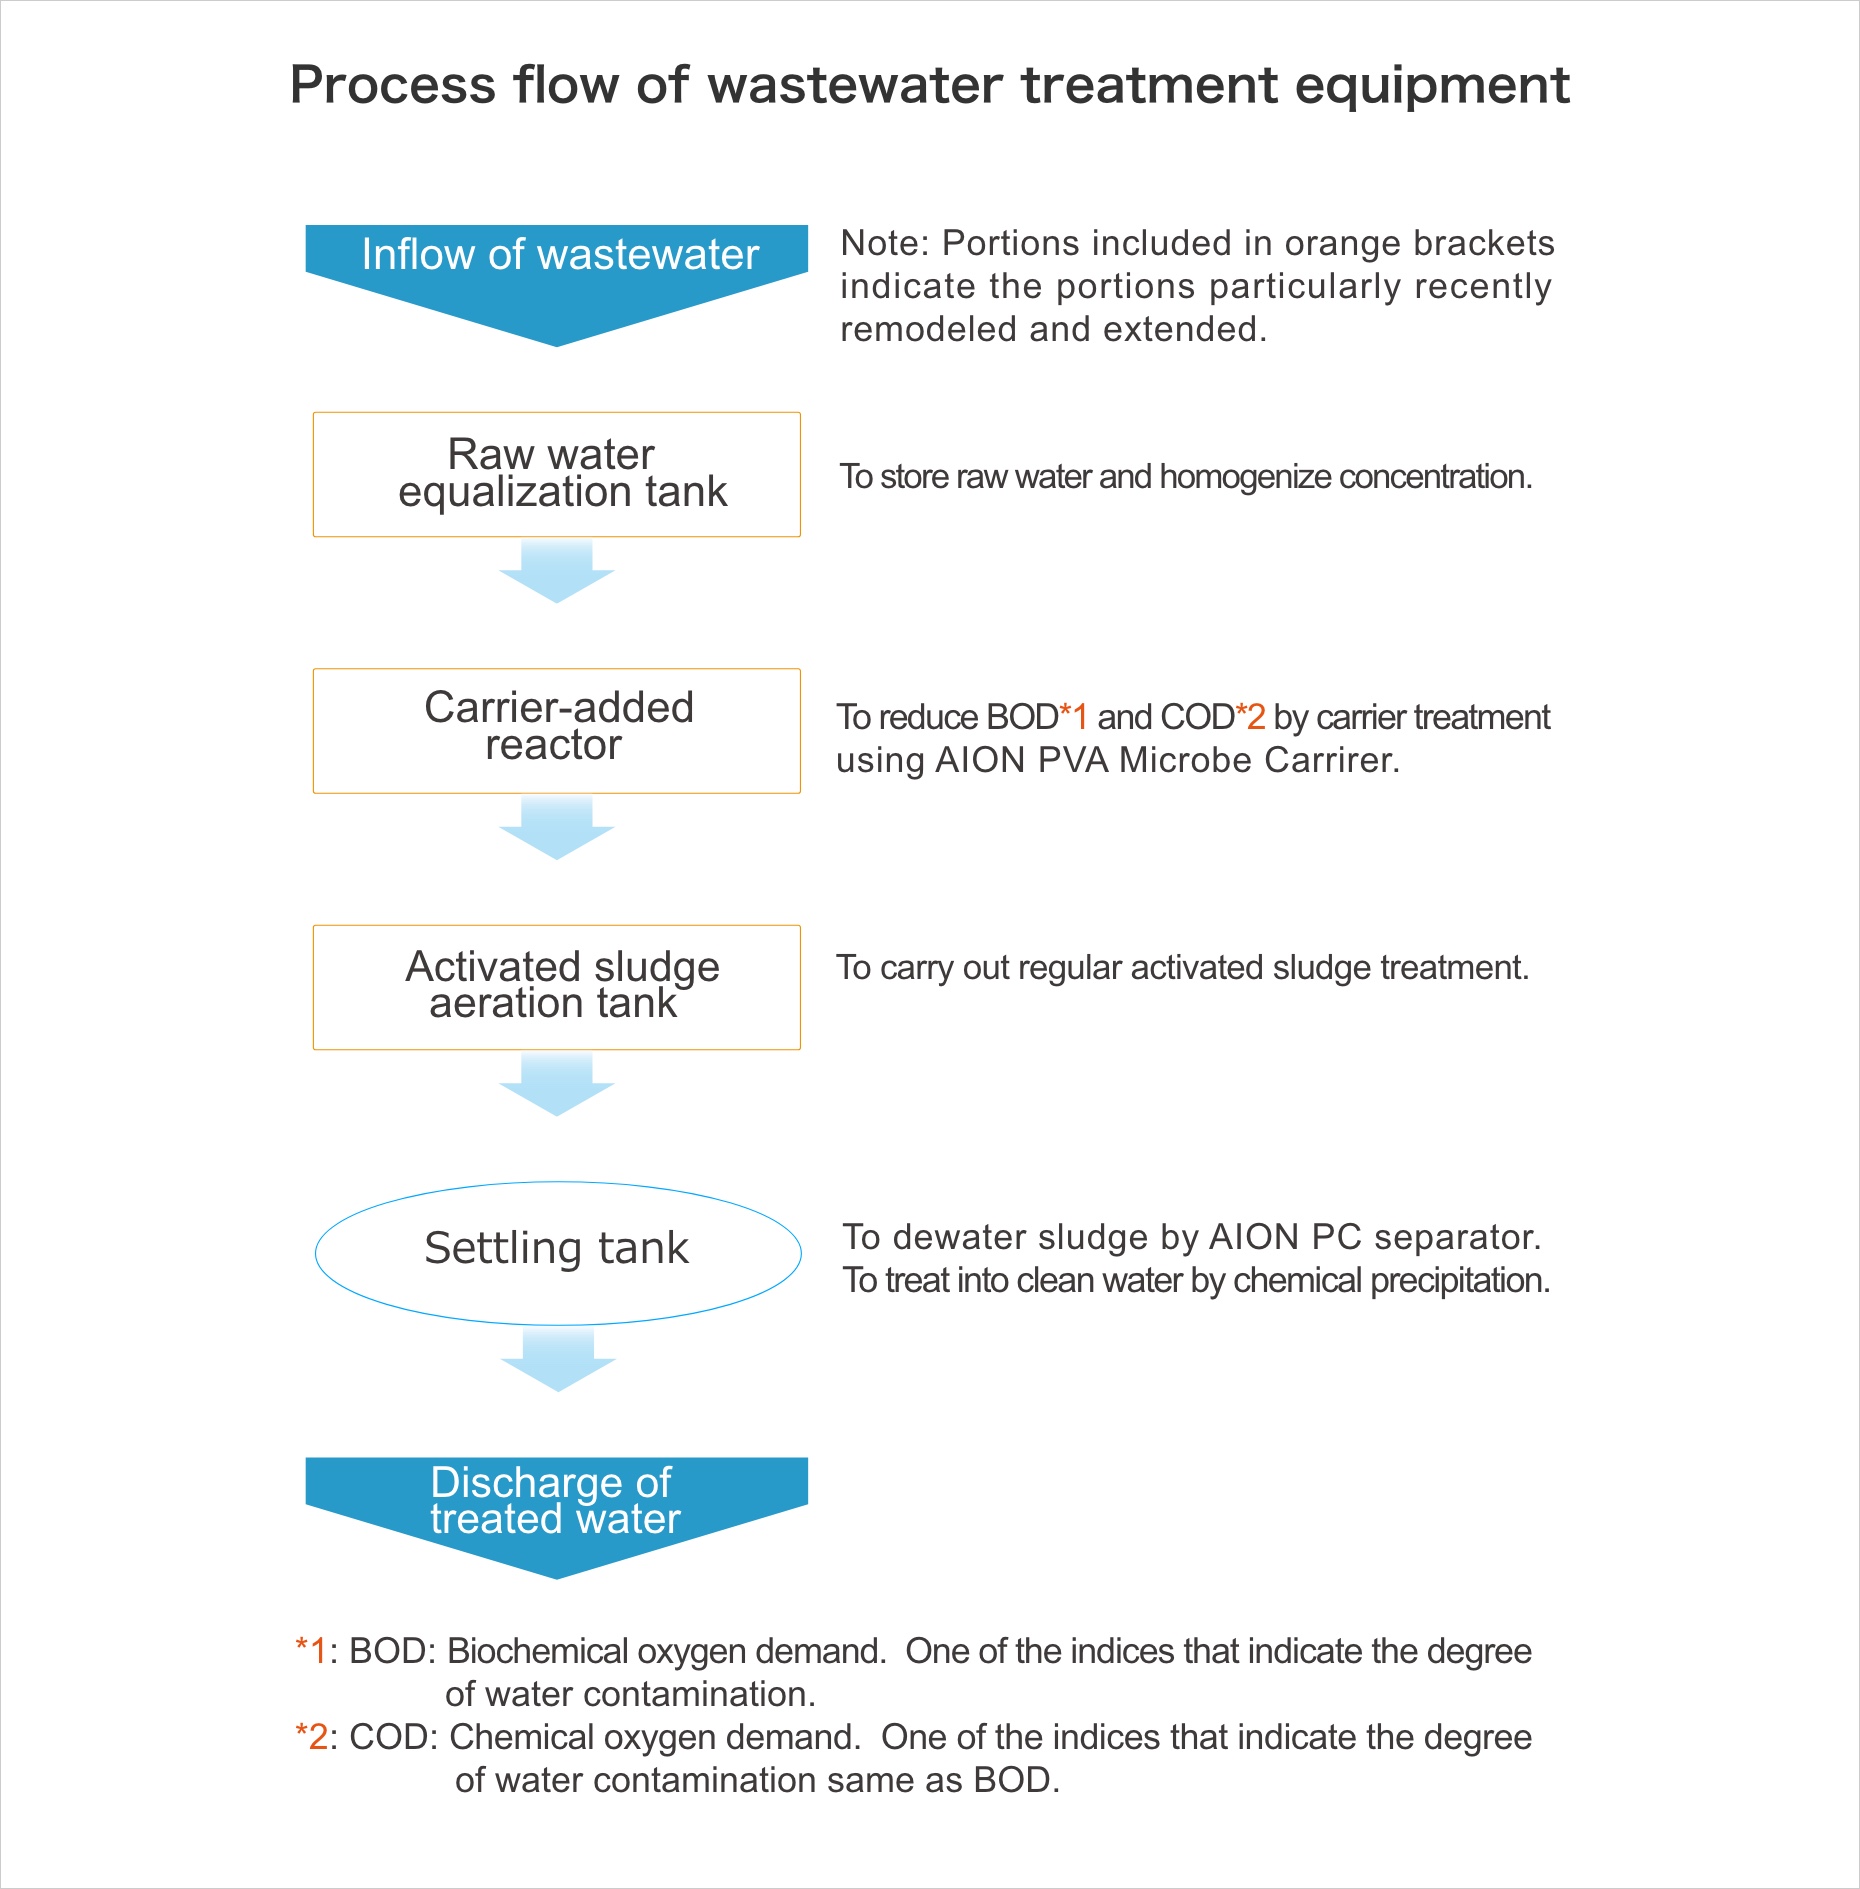 Process flow of wastewater treatment equipment